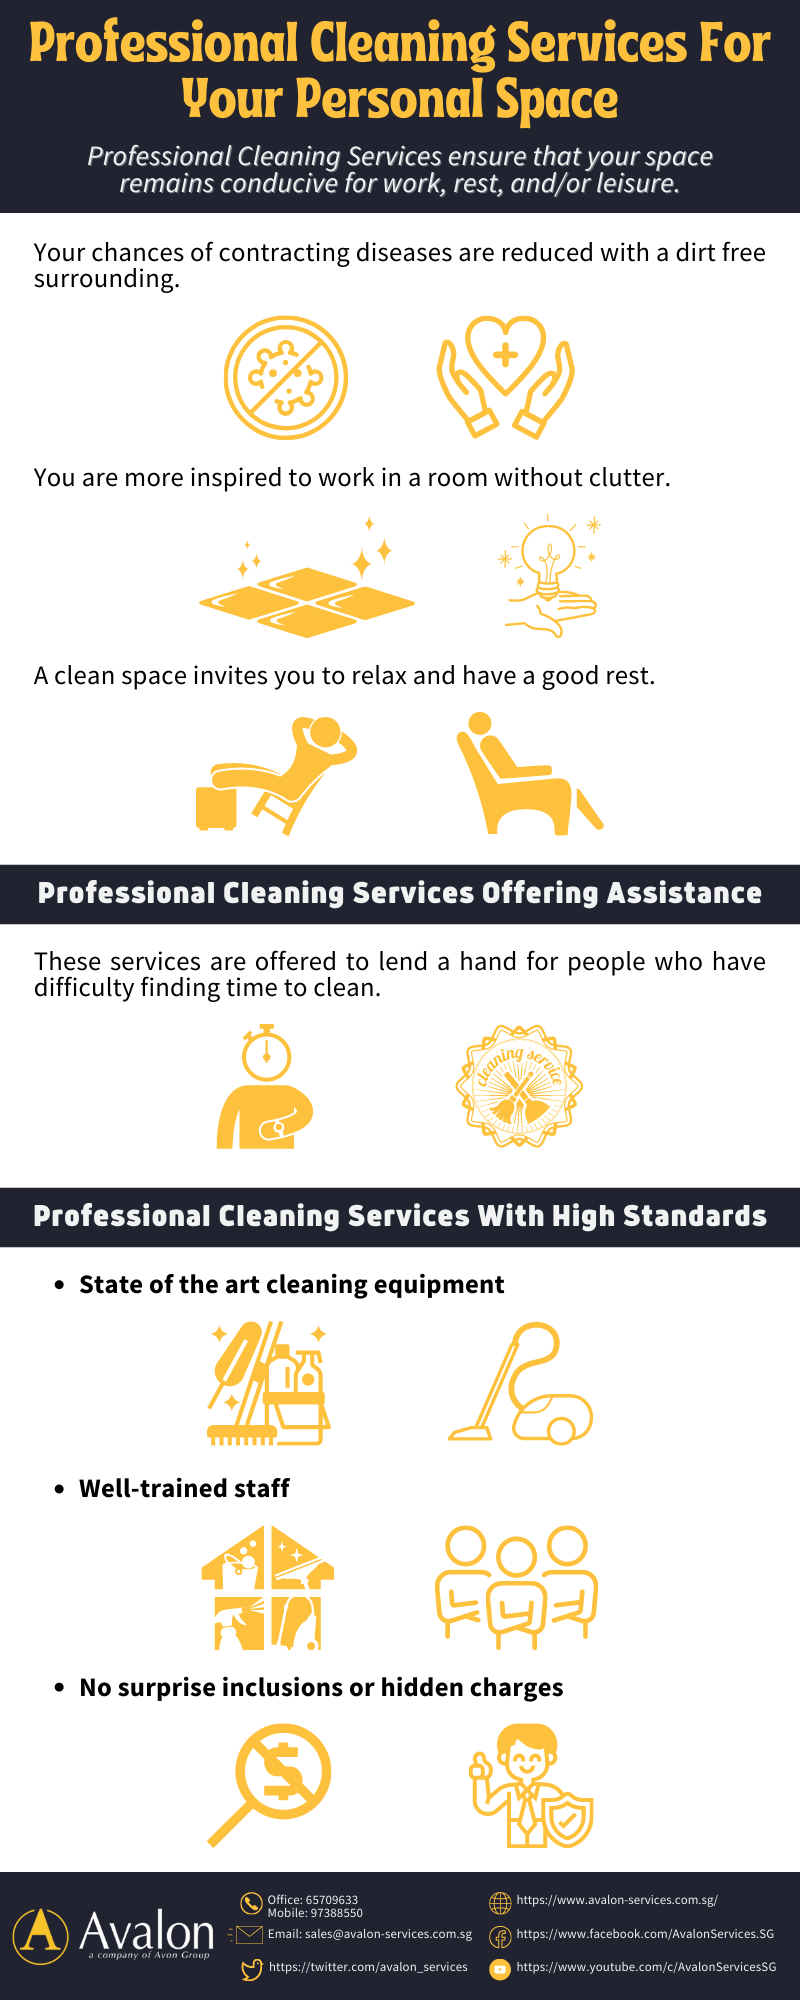 Professional Cleaning Services For Your Personal Space